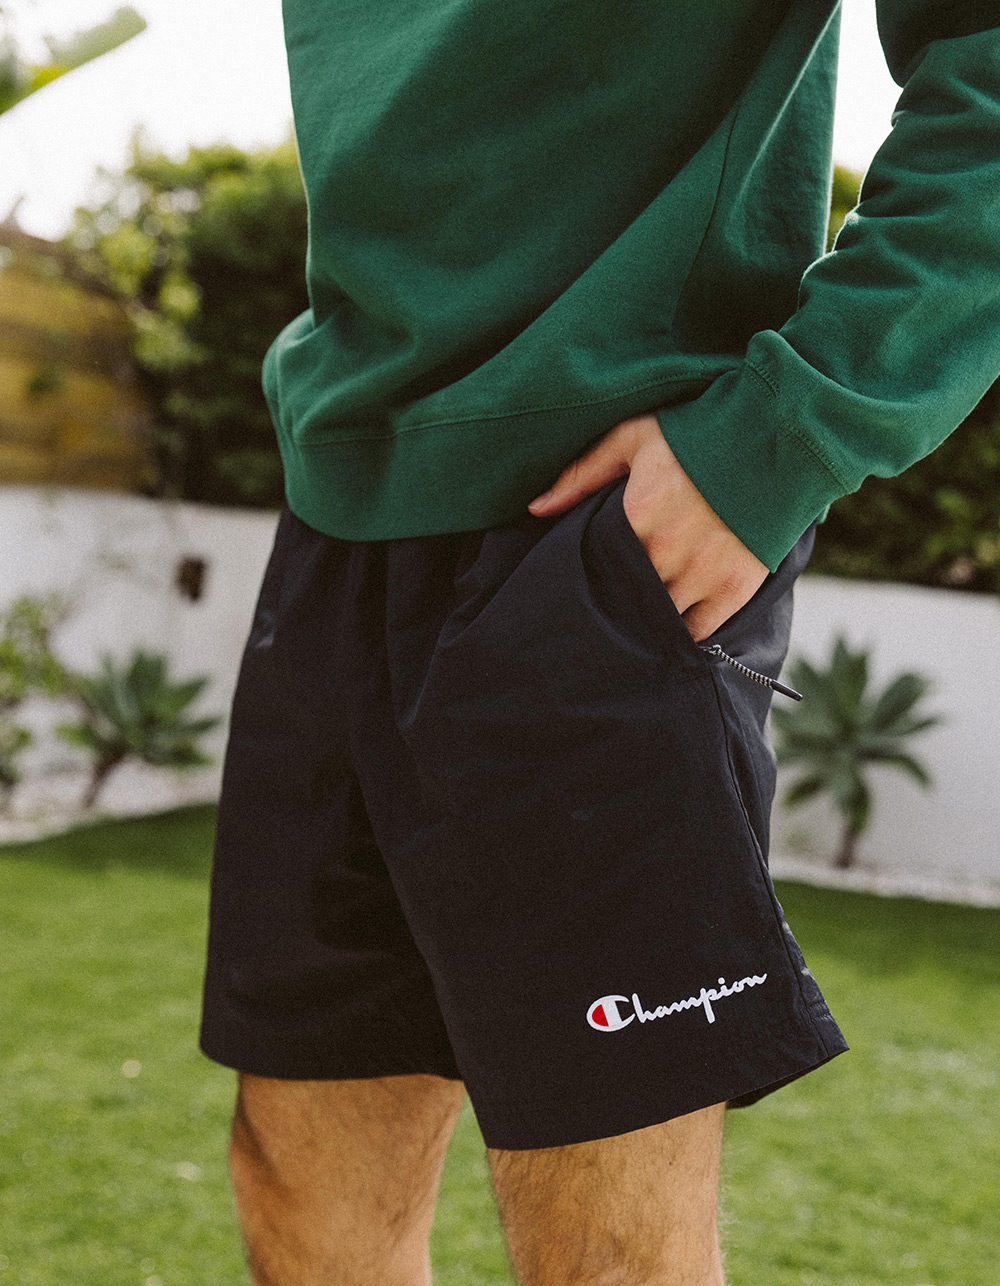 Champion nylon warm-up shorts in red